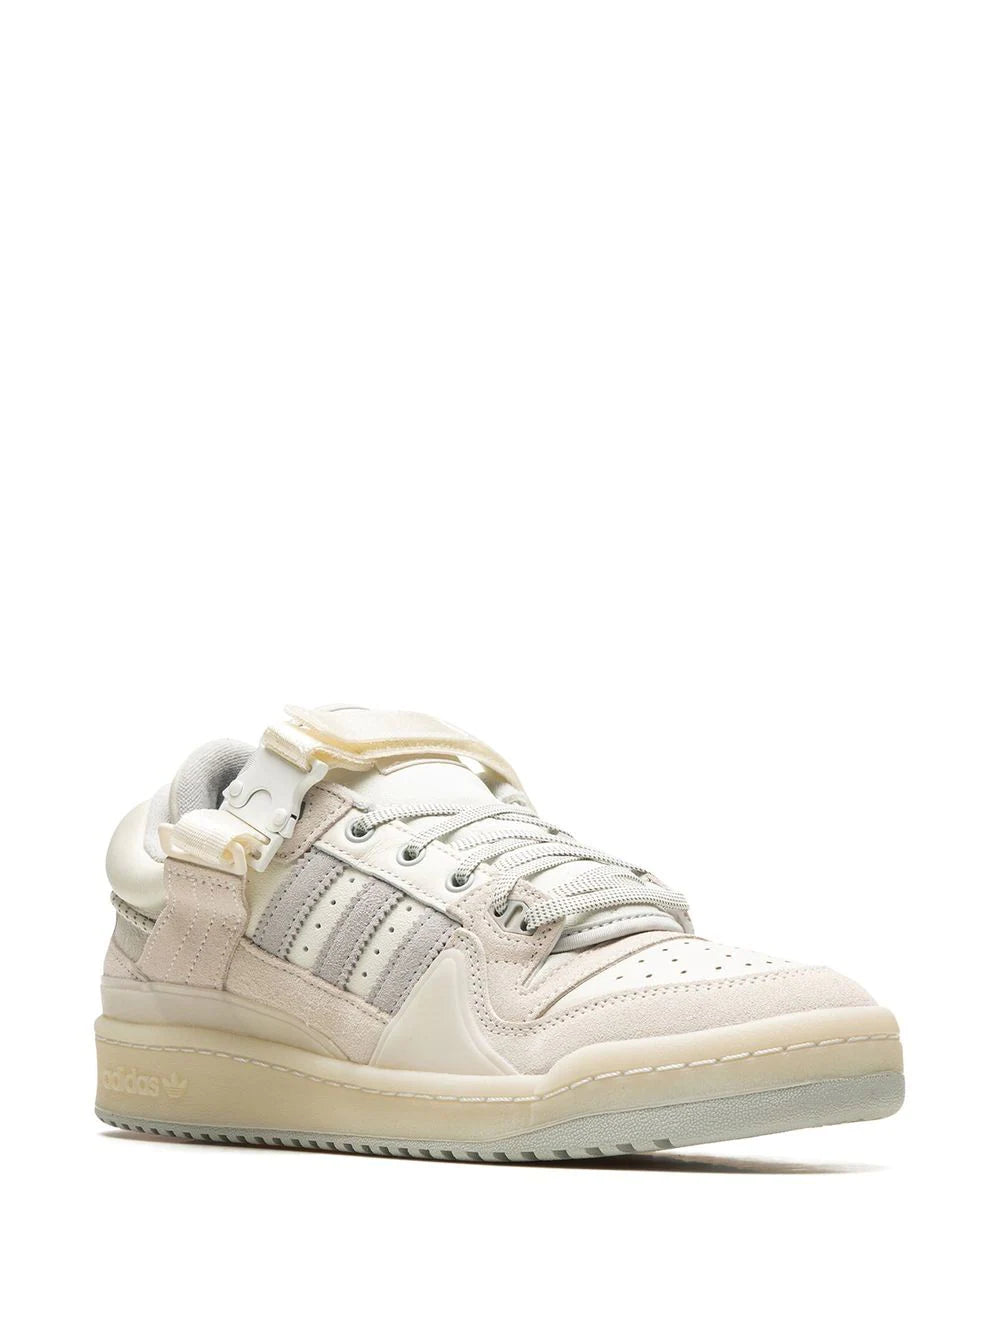 adidas x Bad Bunny Forum Low "off White" sneakers